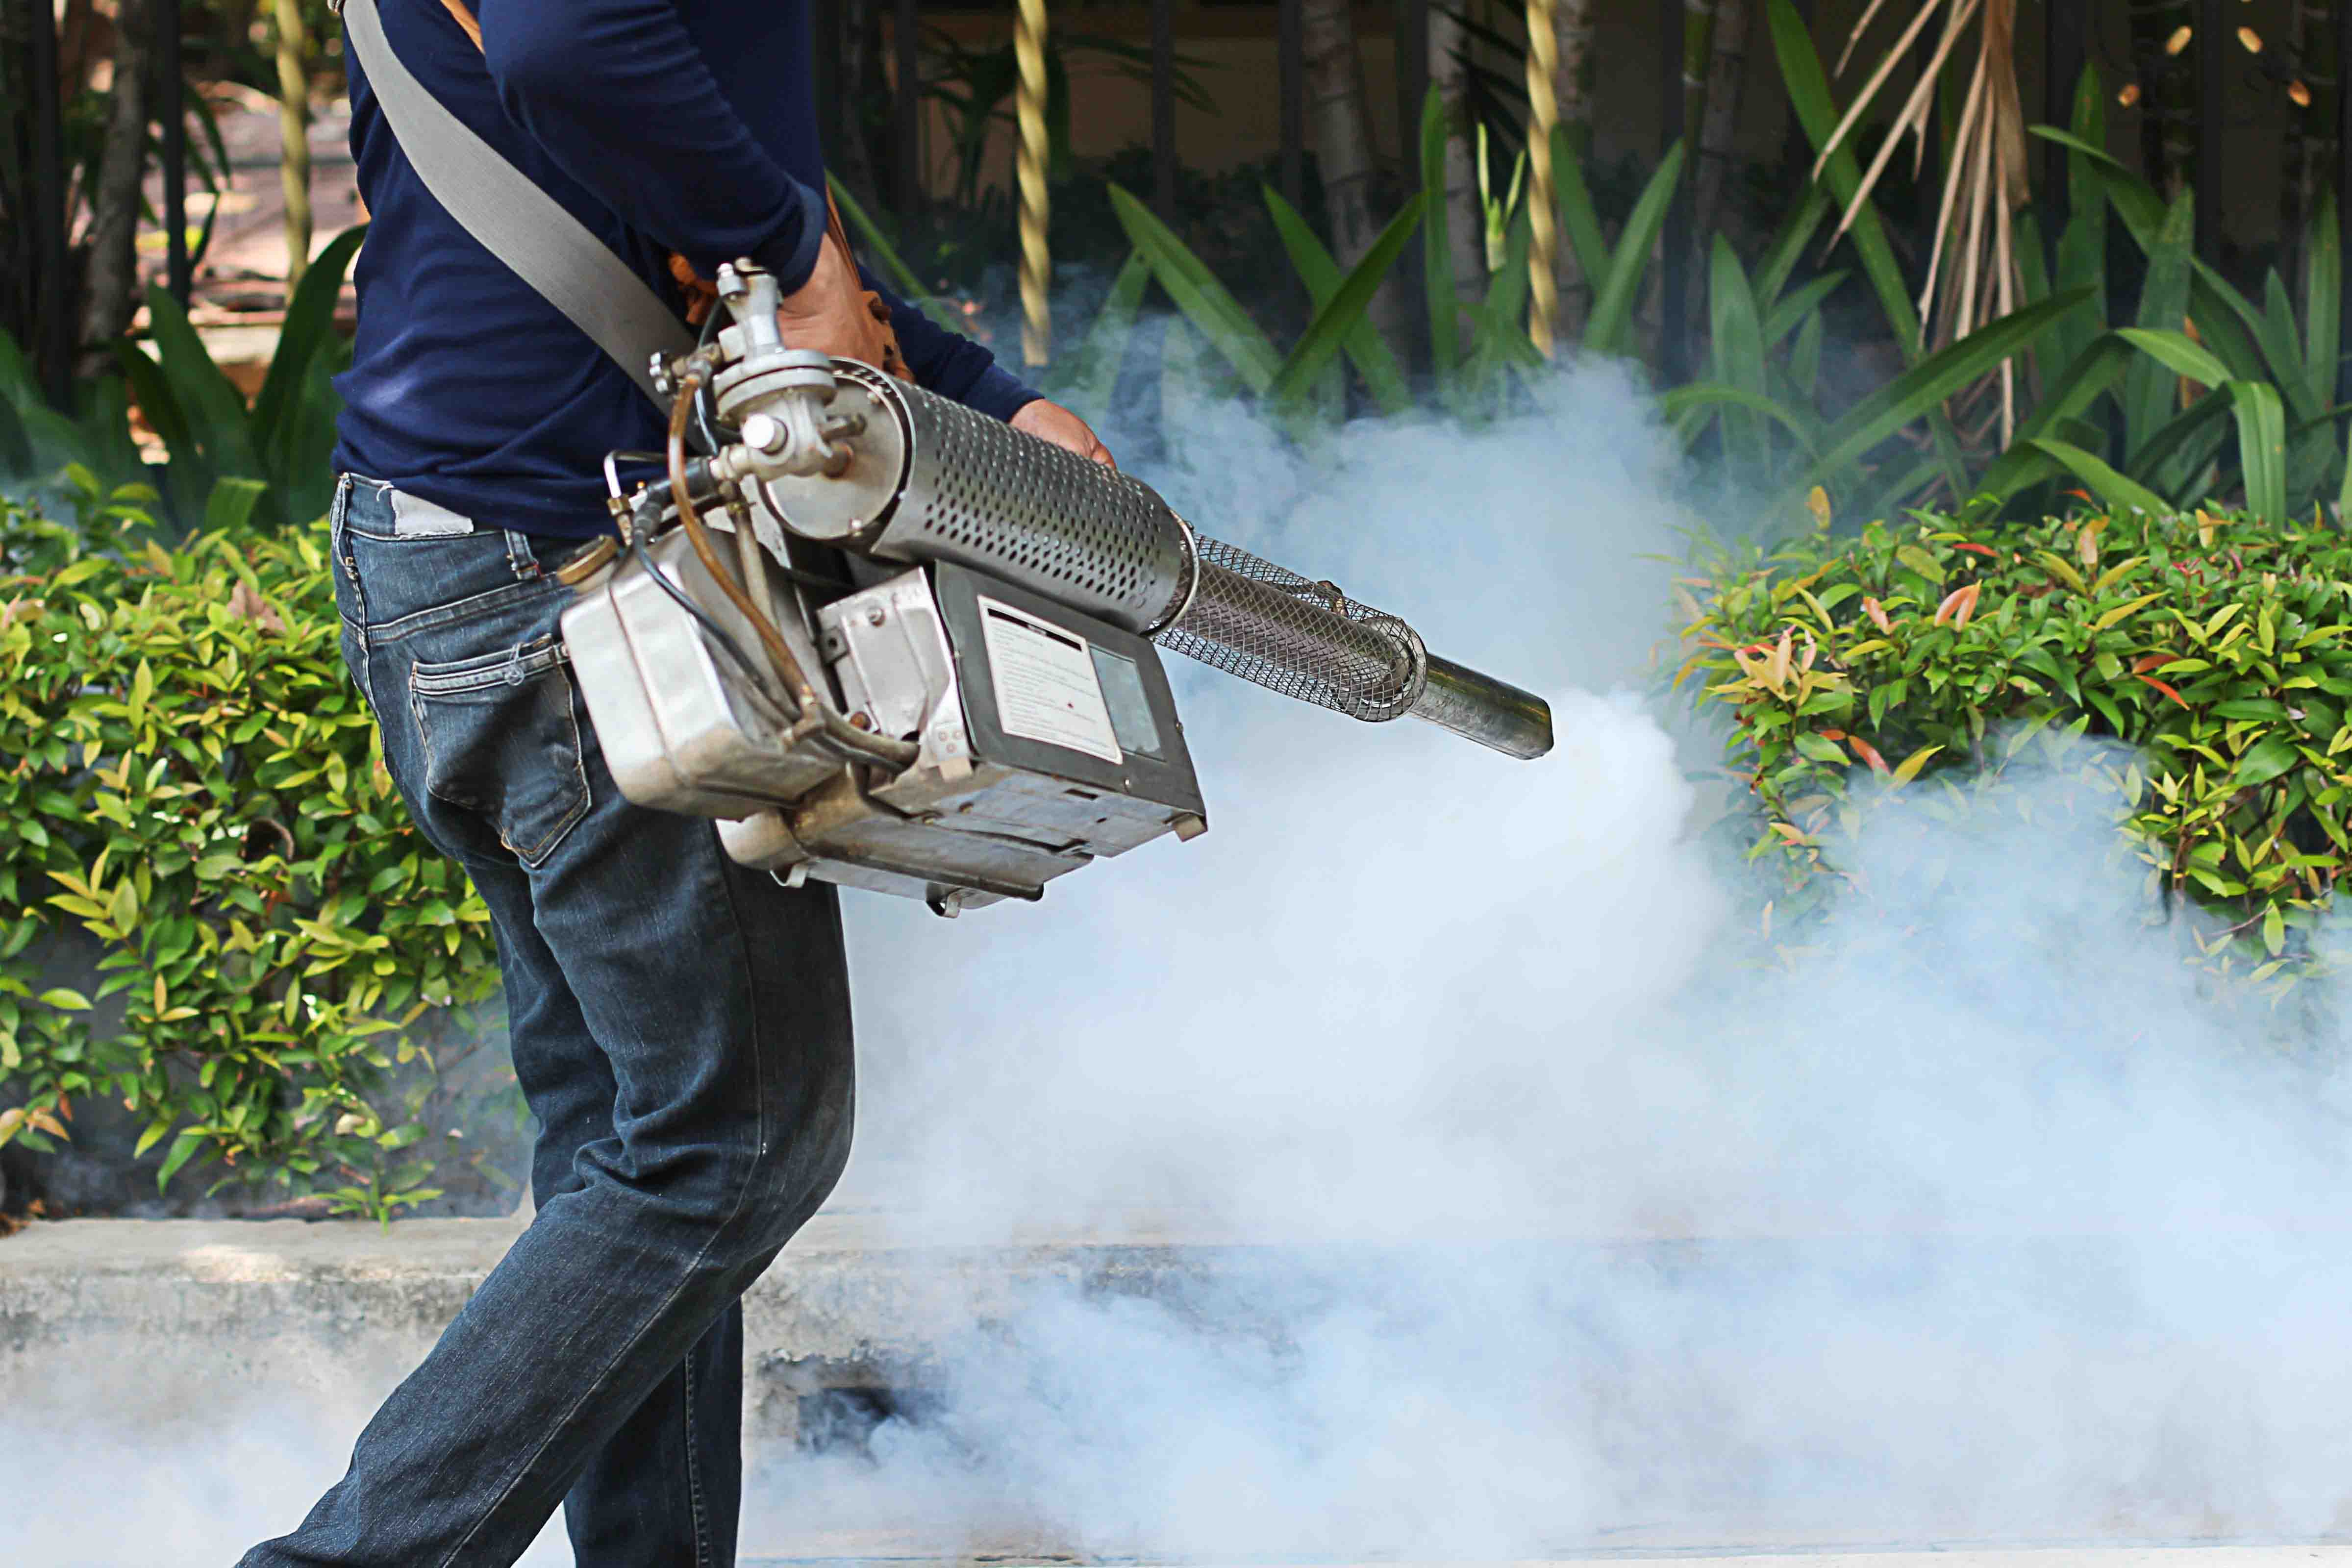 Experience unrivaled mosquito control with our trusted and best mosquito killing product.